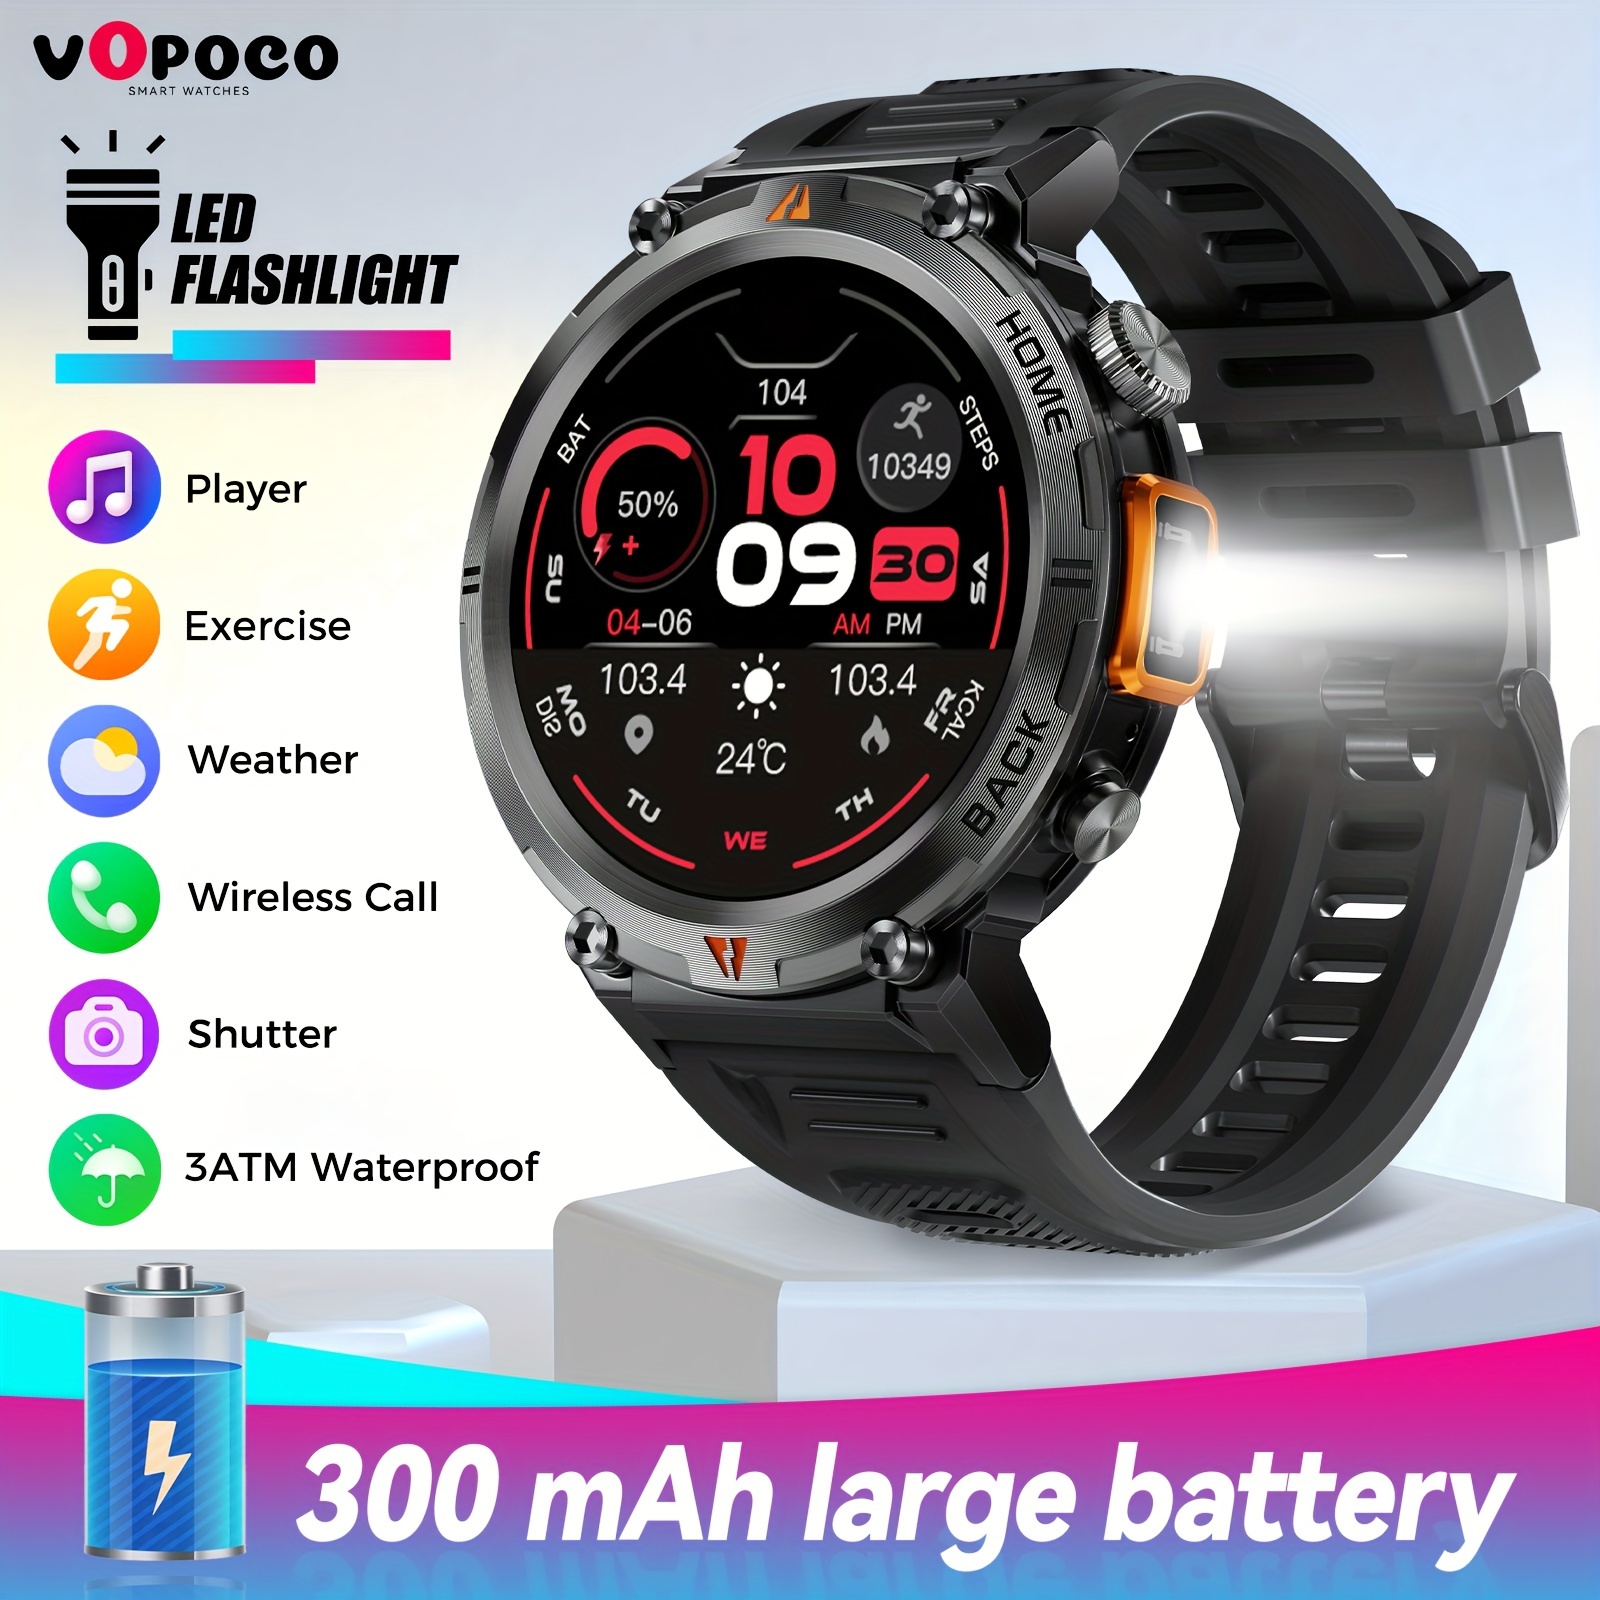 

Vopoco Multi-sport Smart Watch For Men & Women, Android & Ios Compatible, Waterproof, Led Flashlight, Wireless Call & Message Notifications, 300mah Long Battery Life, Ideal Father's Day Gift